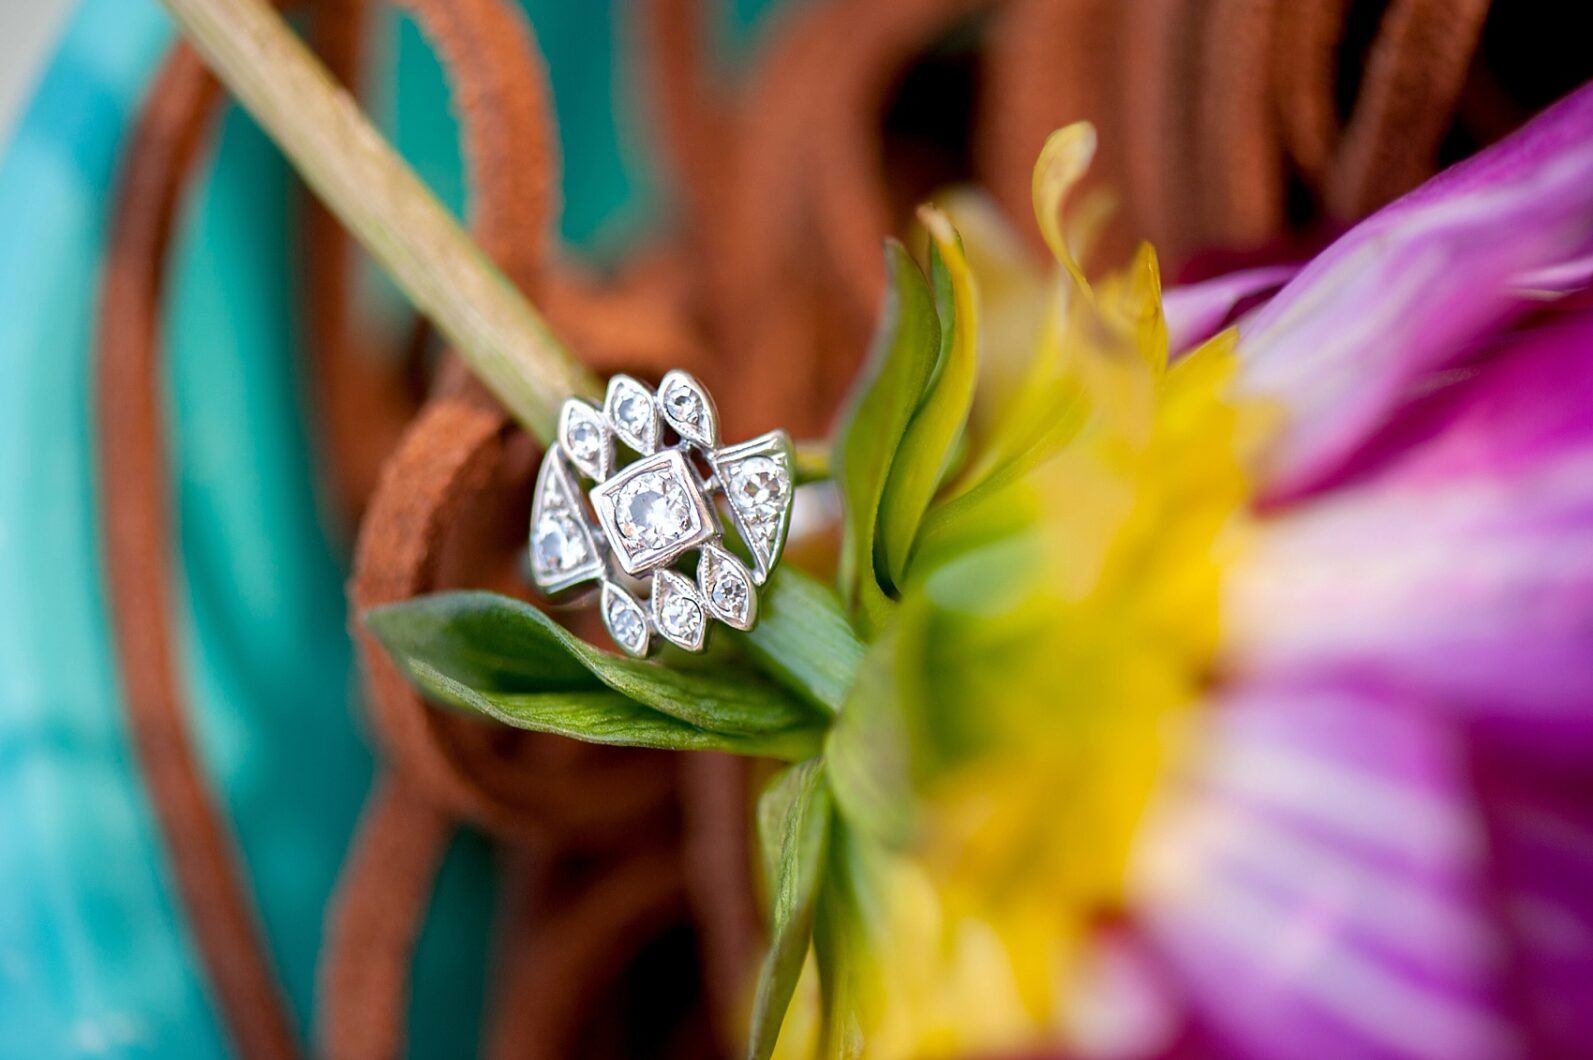 Raleigh wedding photographer's personal story of the art deco diamond ring she wears daily, which was her grand grandmother's.